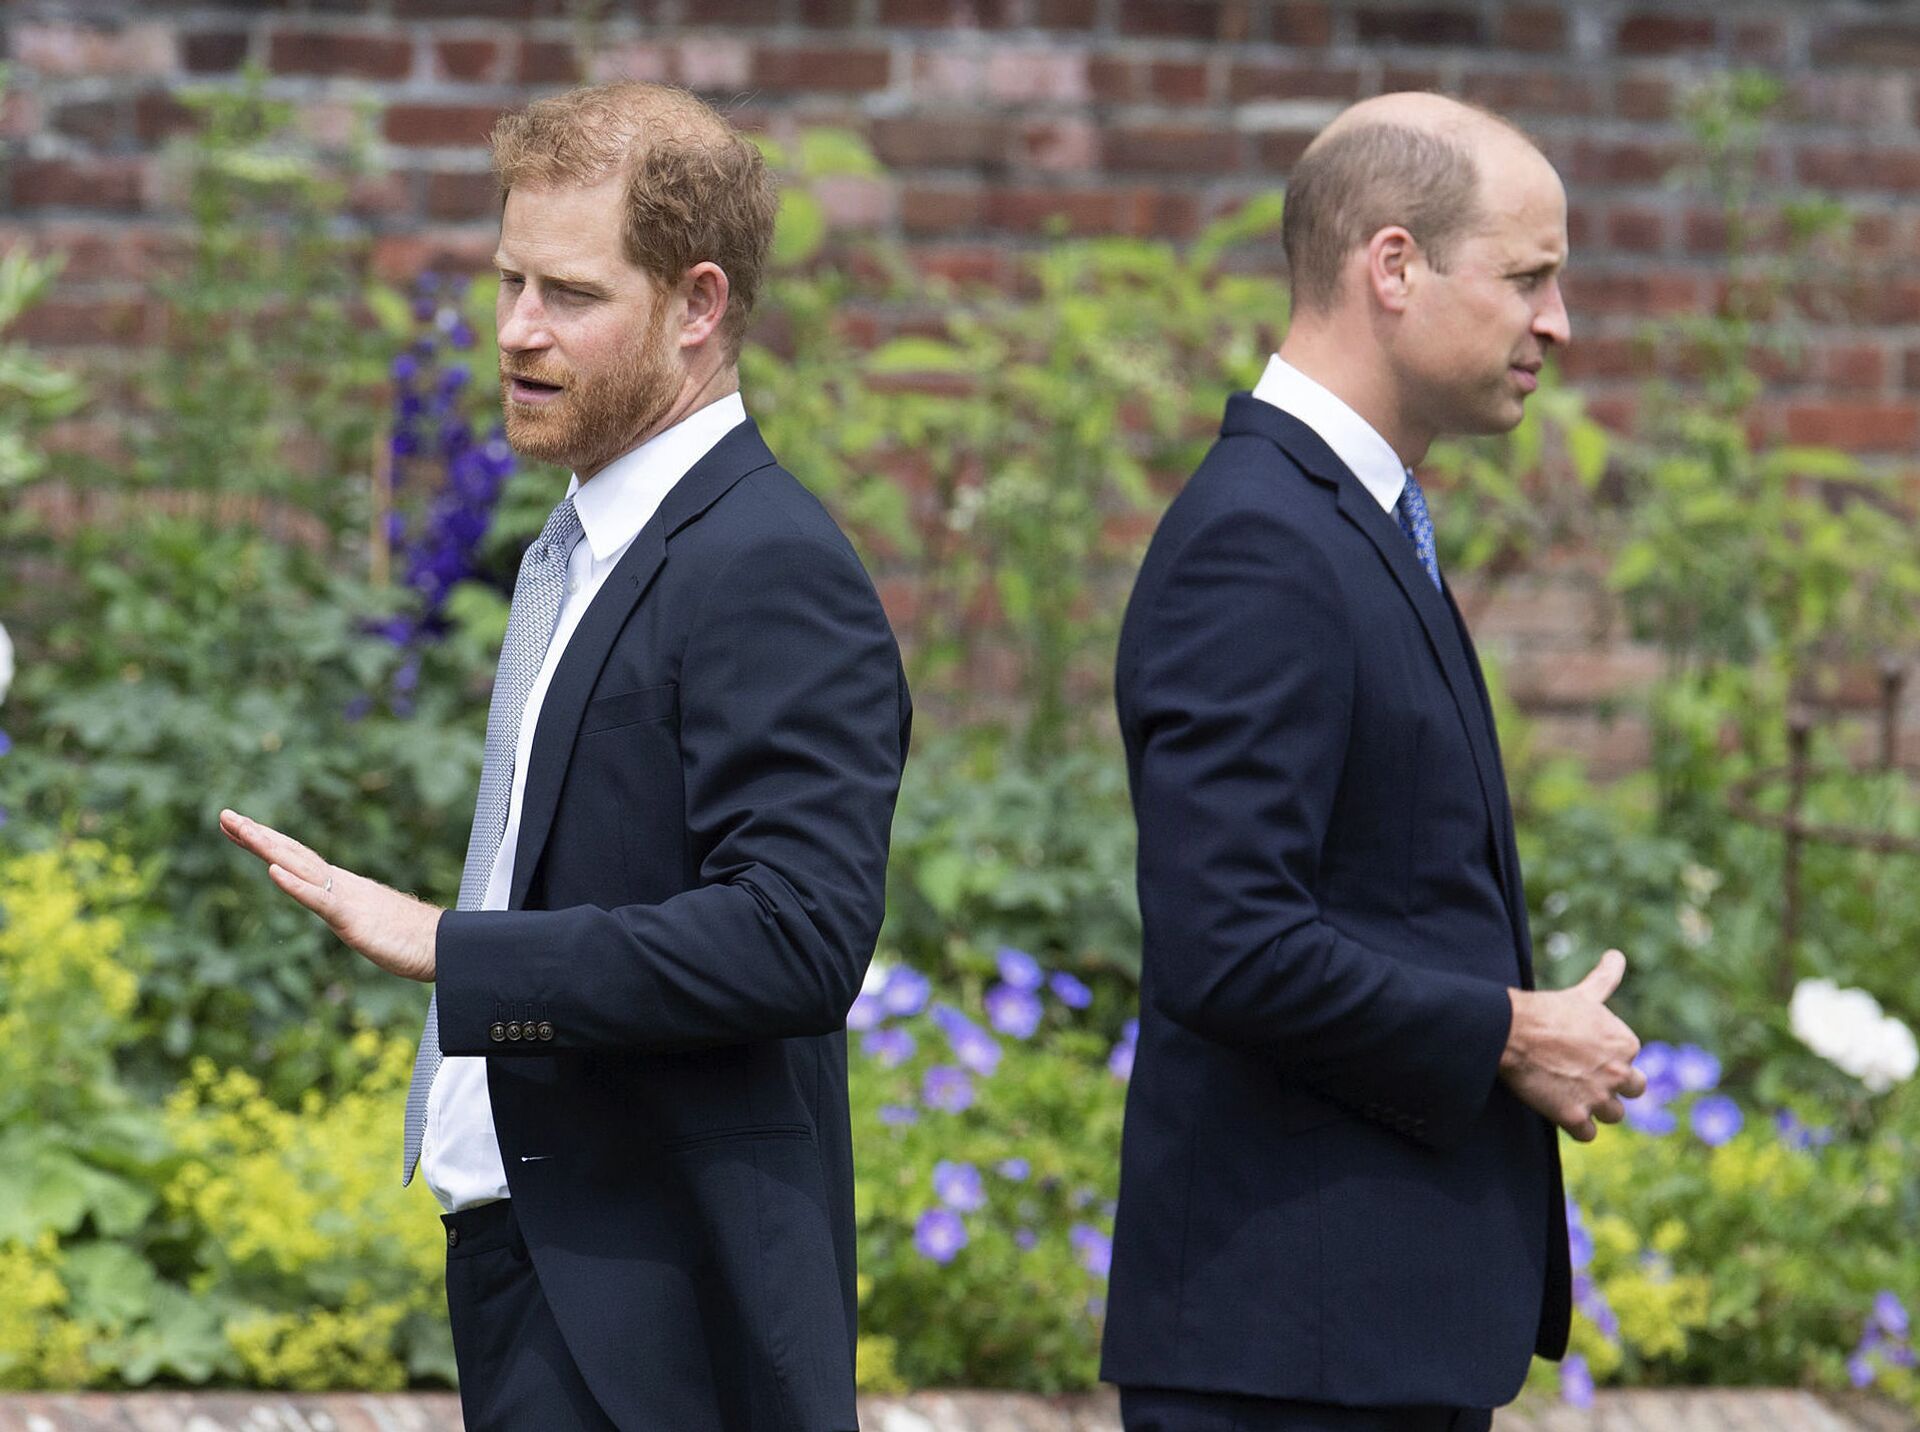 Prince Harry, left, and Prince William stand together during the unveiling of a statue they commissioned of their mother Princess Diana, on what woud have been her 60th birthday, in the Sunken Garden at Kensington Palace, London, Thursday July 1, 2021 - Sputnik International, 1920, 07.09.2021